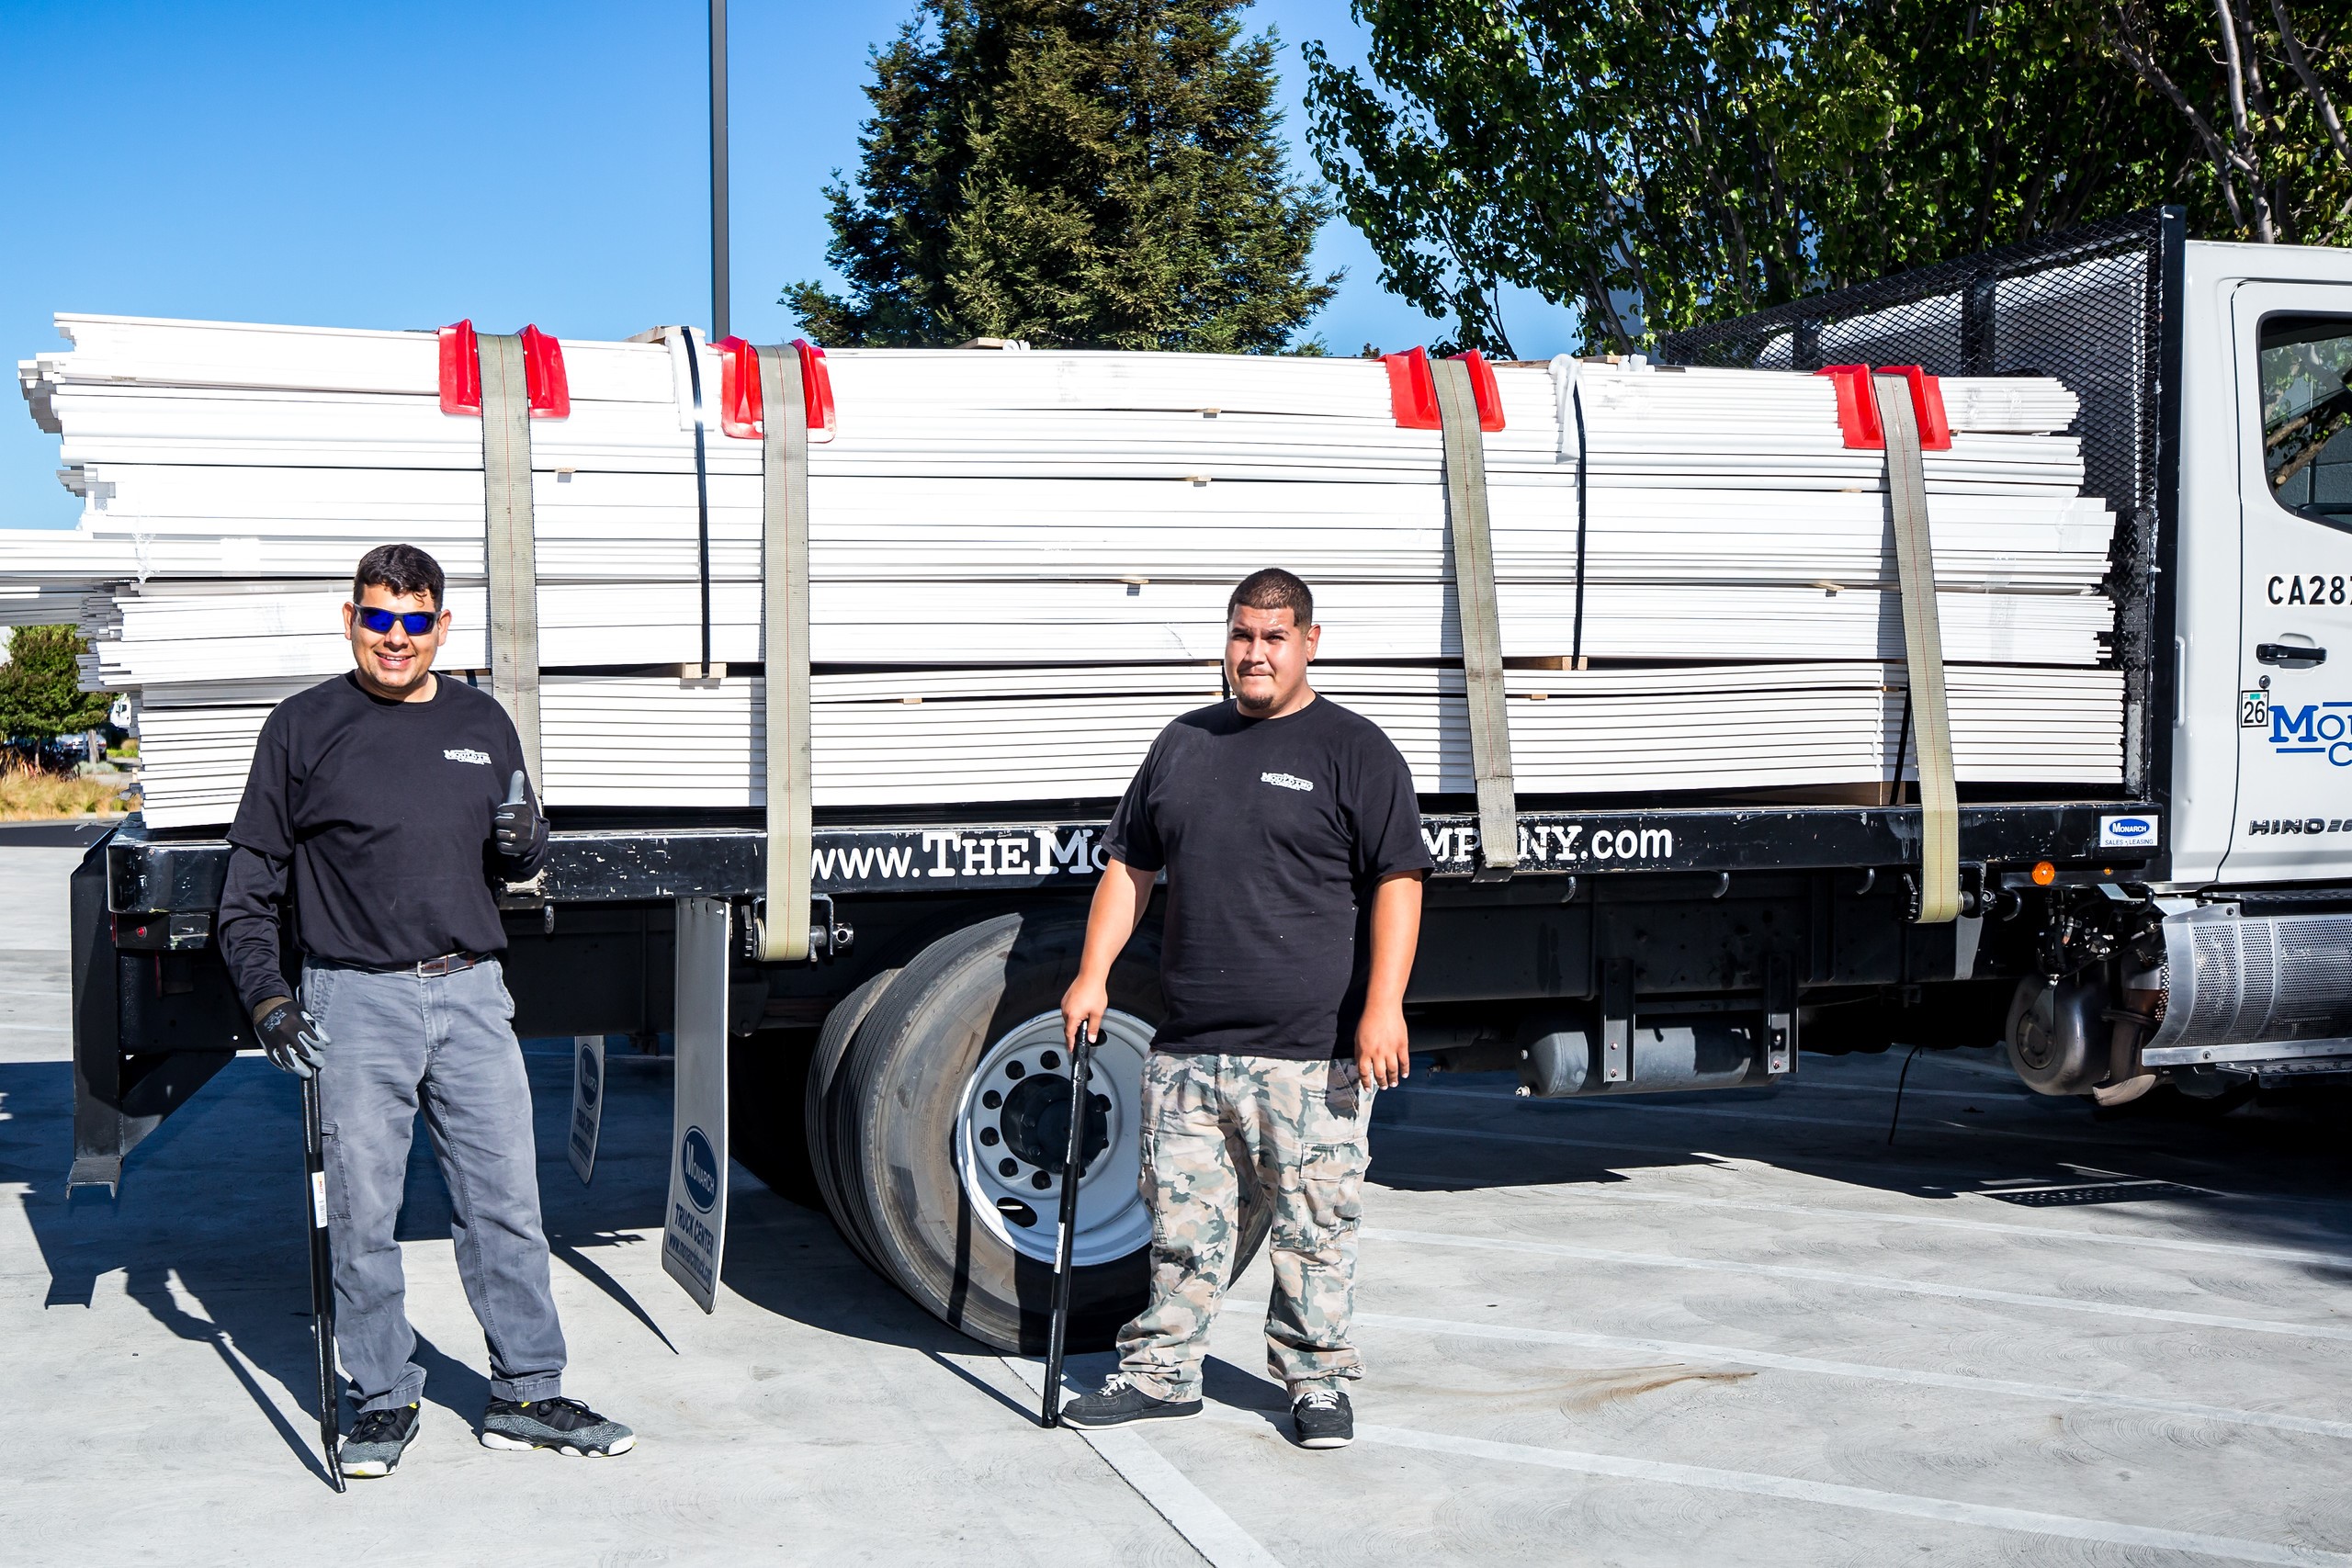 Employees with Delivery Truck